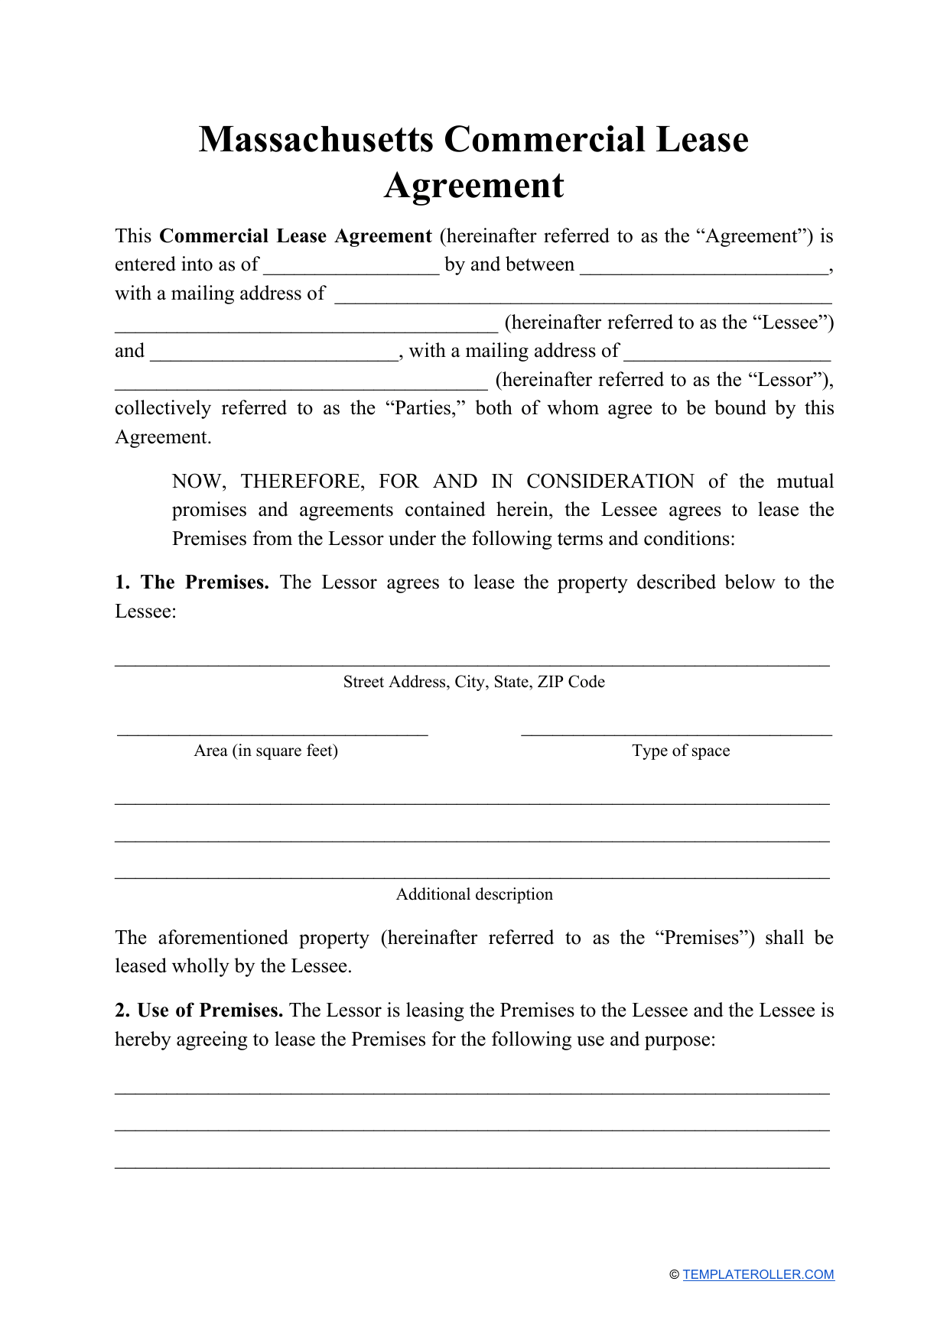 massachusetts commercial lease agreement template download printable pdf templateroller